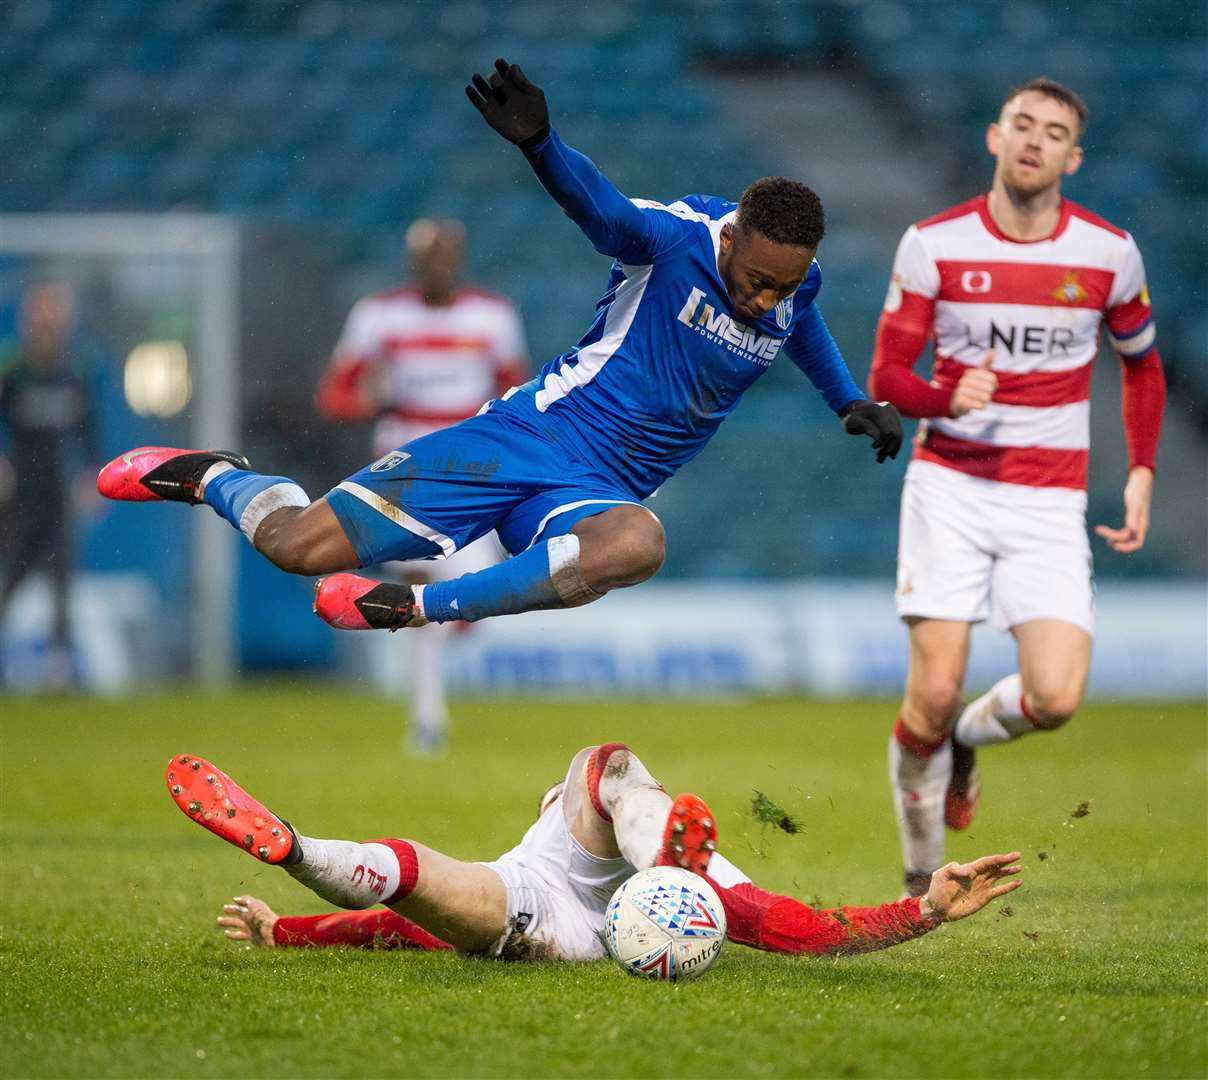 Gillingham forward Brandon Hanlan has to try and hurdle Ben Sheaf's challenge. Picture: Ady Kerry